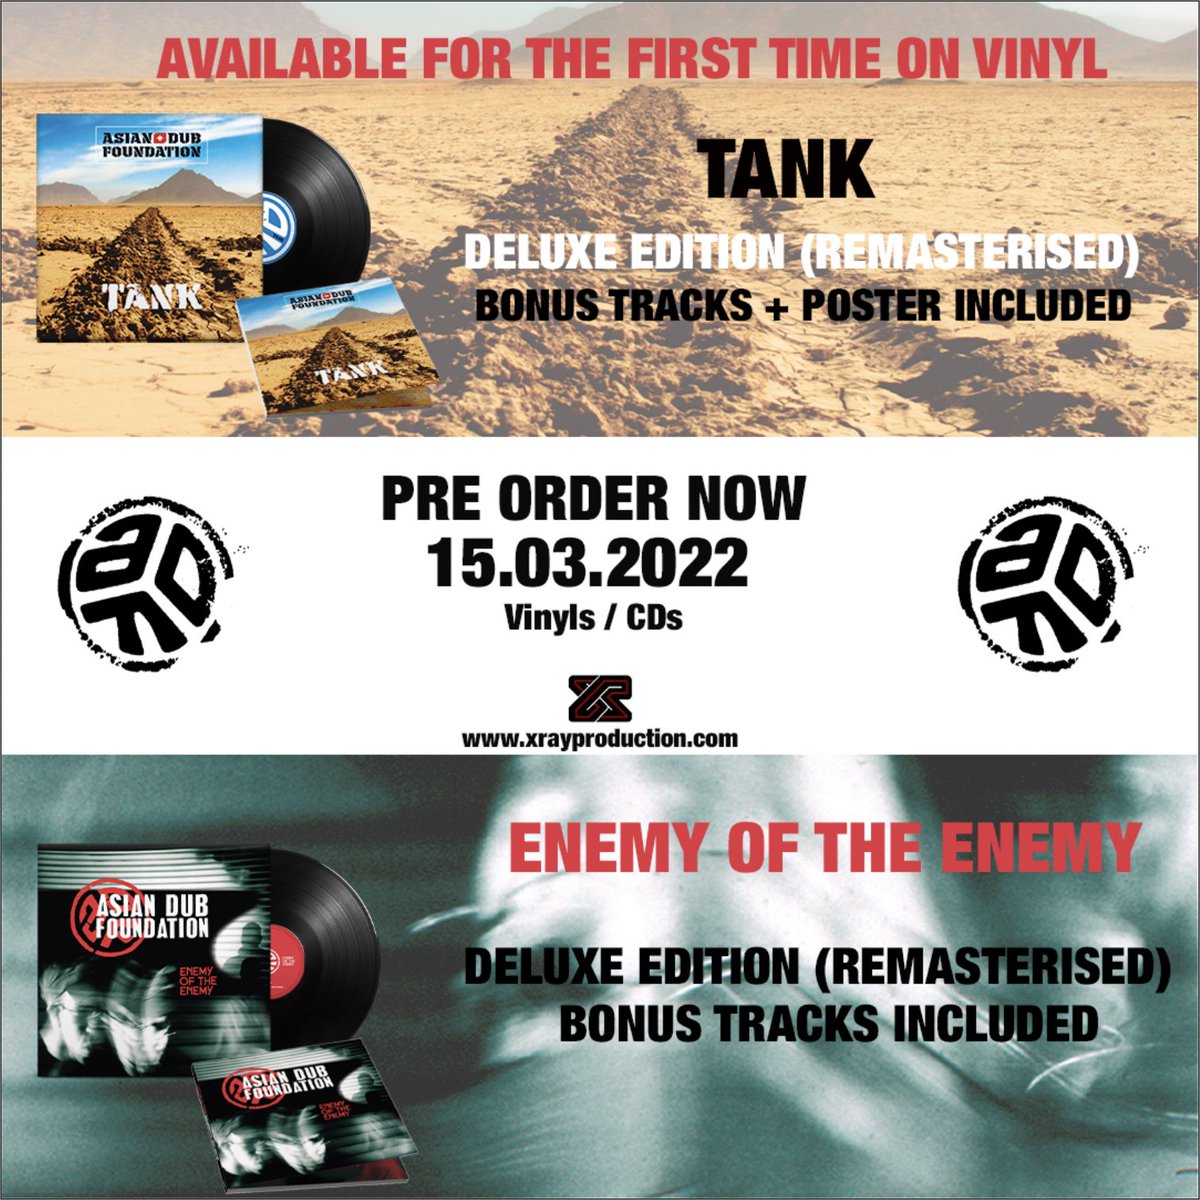 We’re happy to announce new editions of both “Enemy Of the Enemy” and “Tank” on CD and- for the first time EVER - on vinyl 💥 Both of these deluxe versions include previously unreleased tracks and are available RIGHT NOW for pre-order 👉 bit.ly/3tswlVq